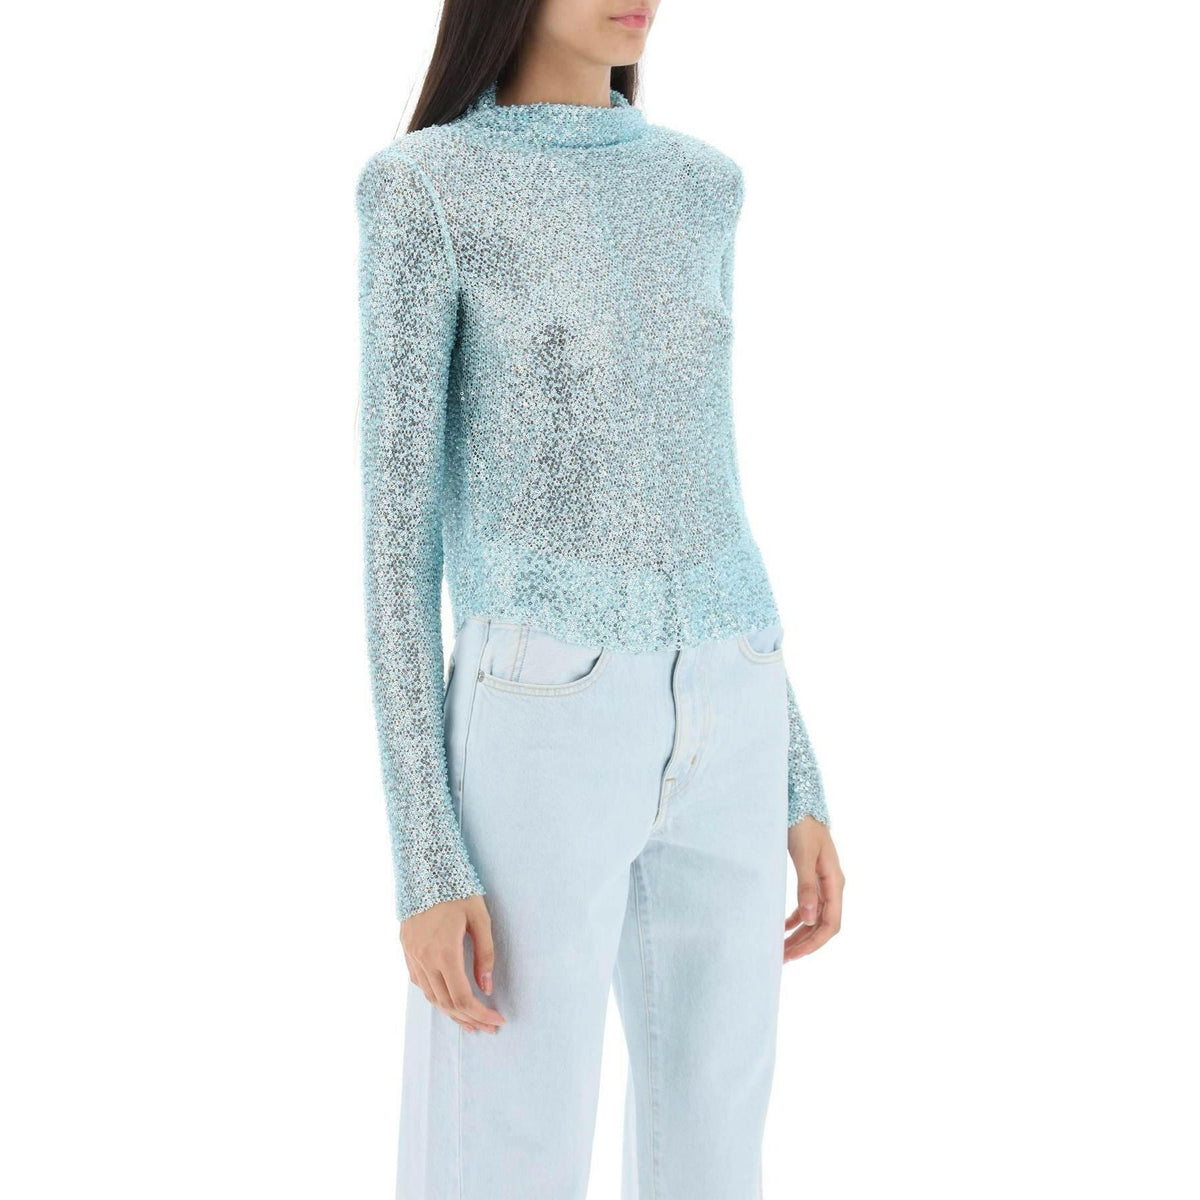 Long Sleeved Top With Sequins And Beads SELF PORTRAIT JOHN JULIA.